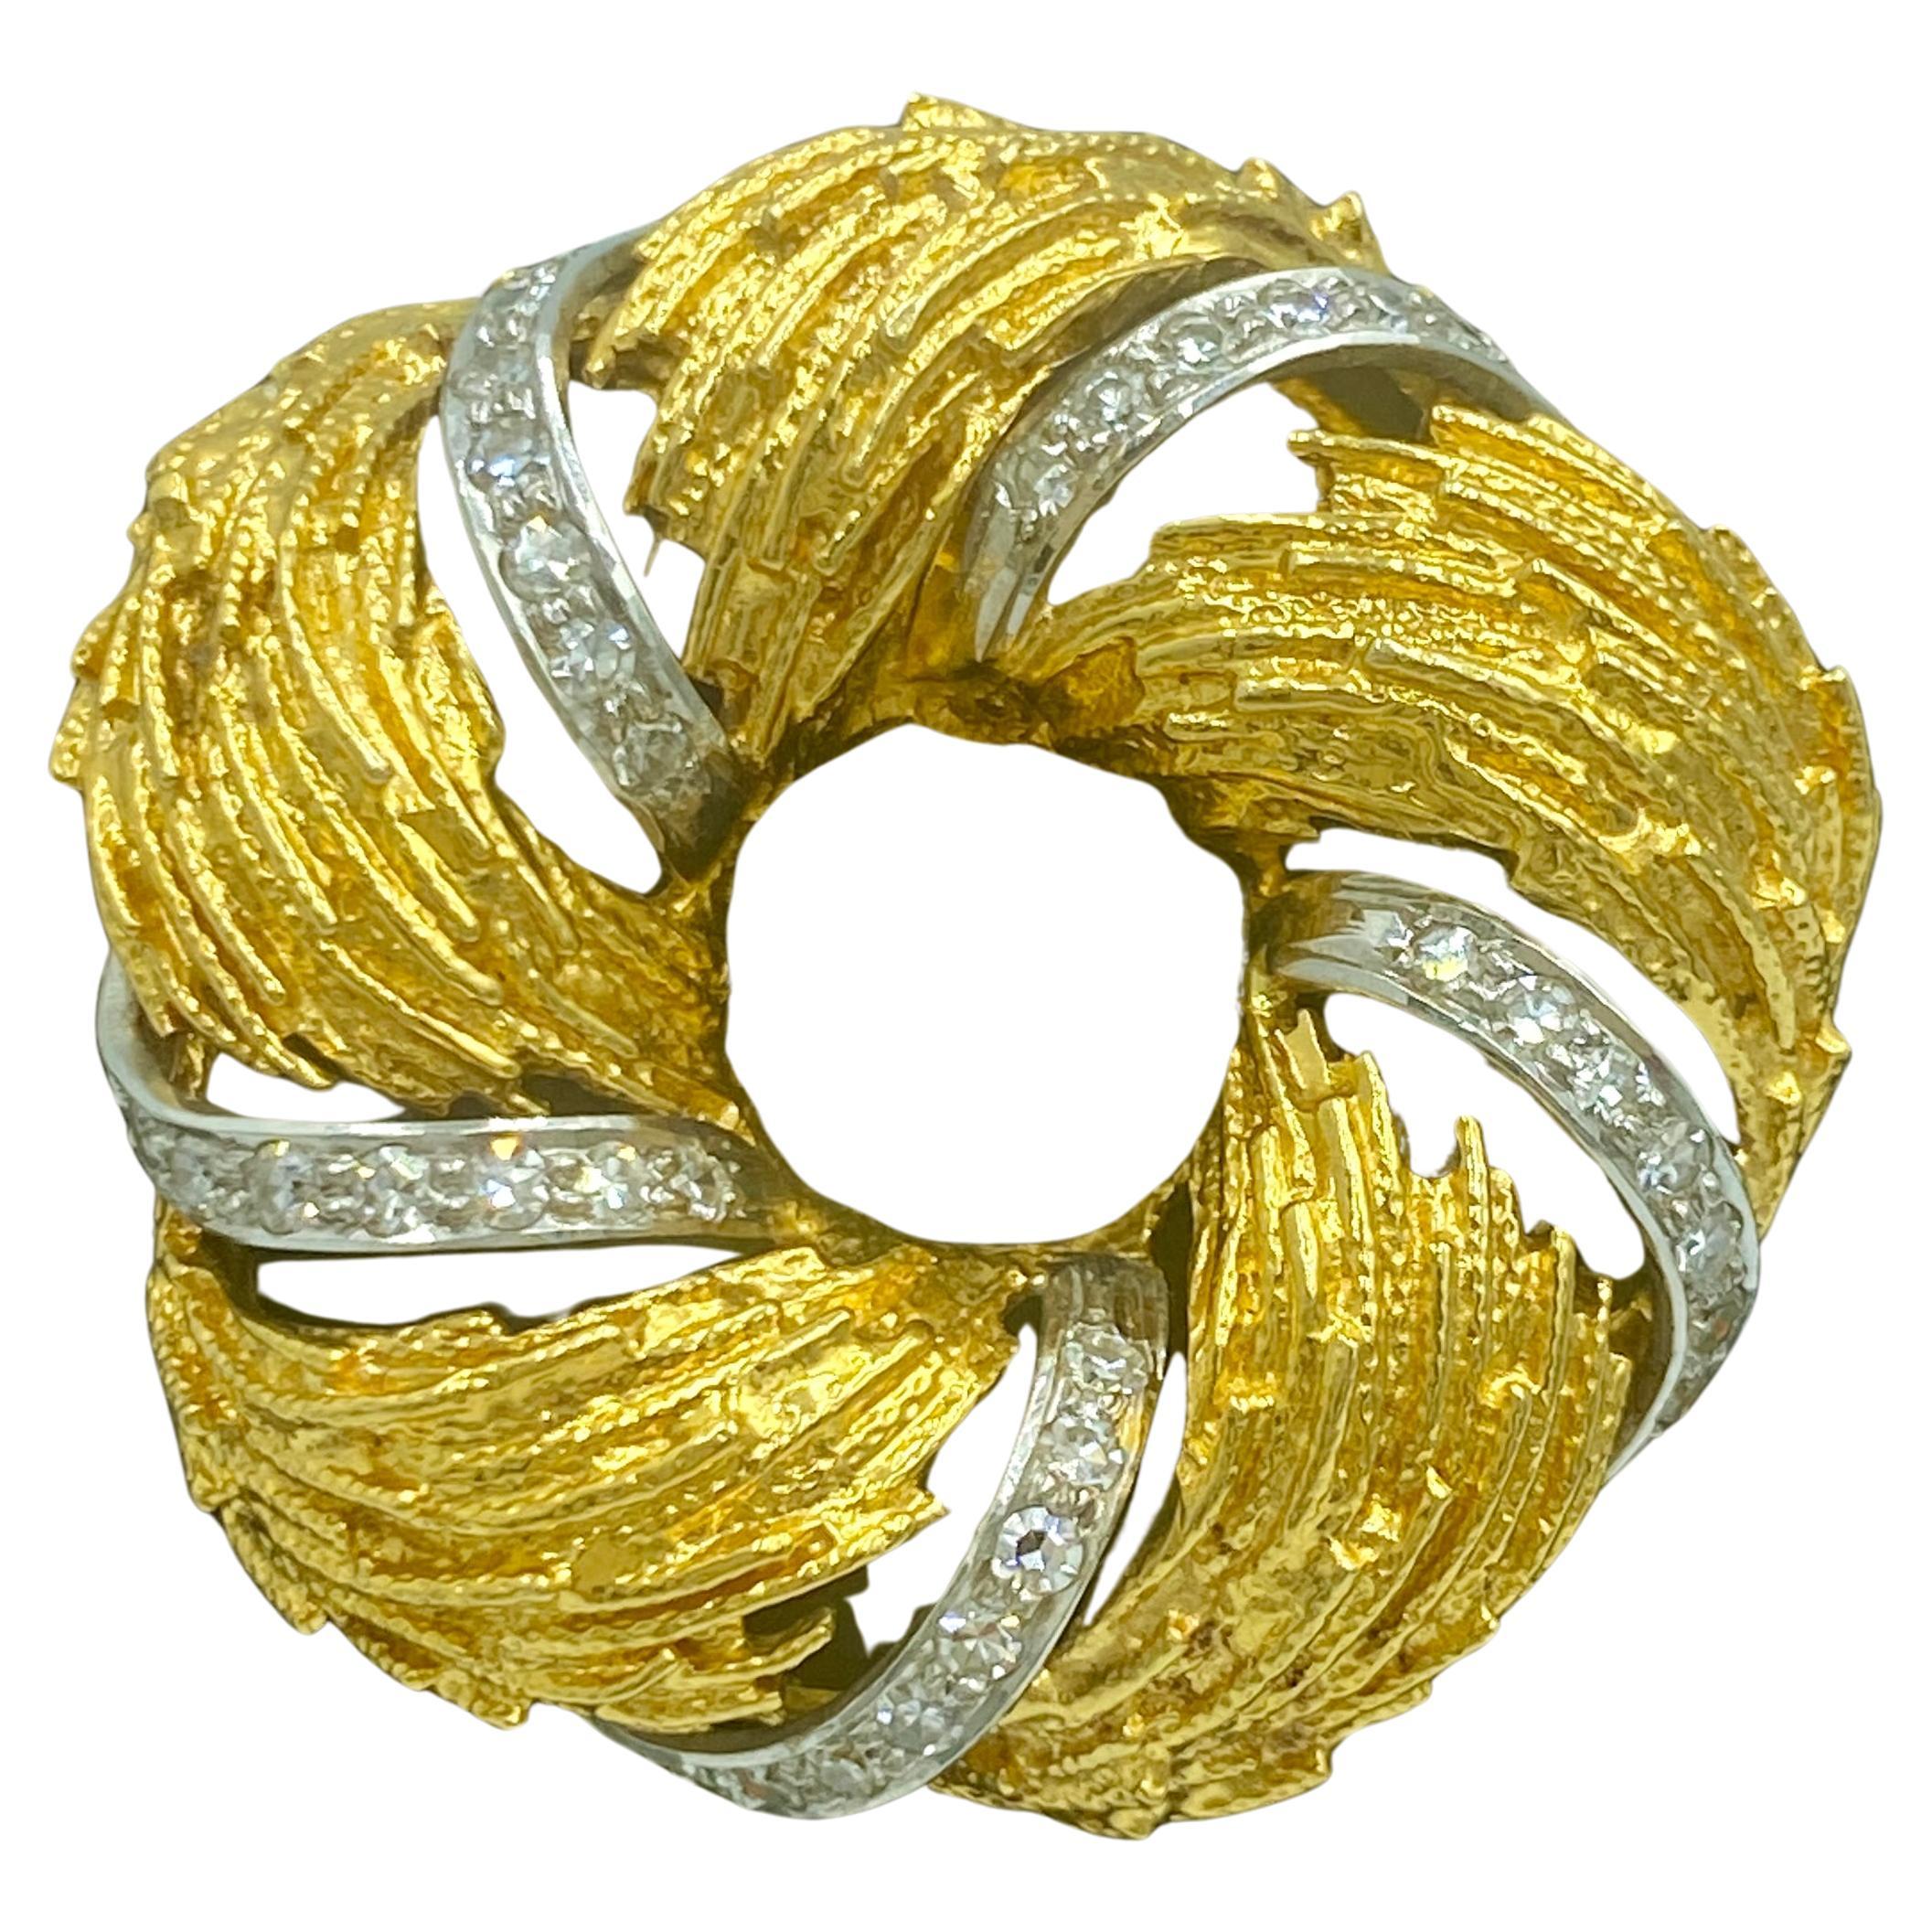 1960s European 18k gold and diamond wreath brooch For Sale